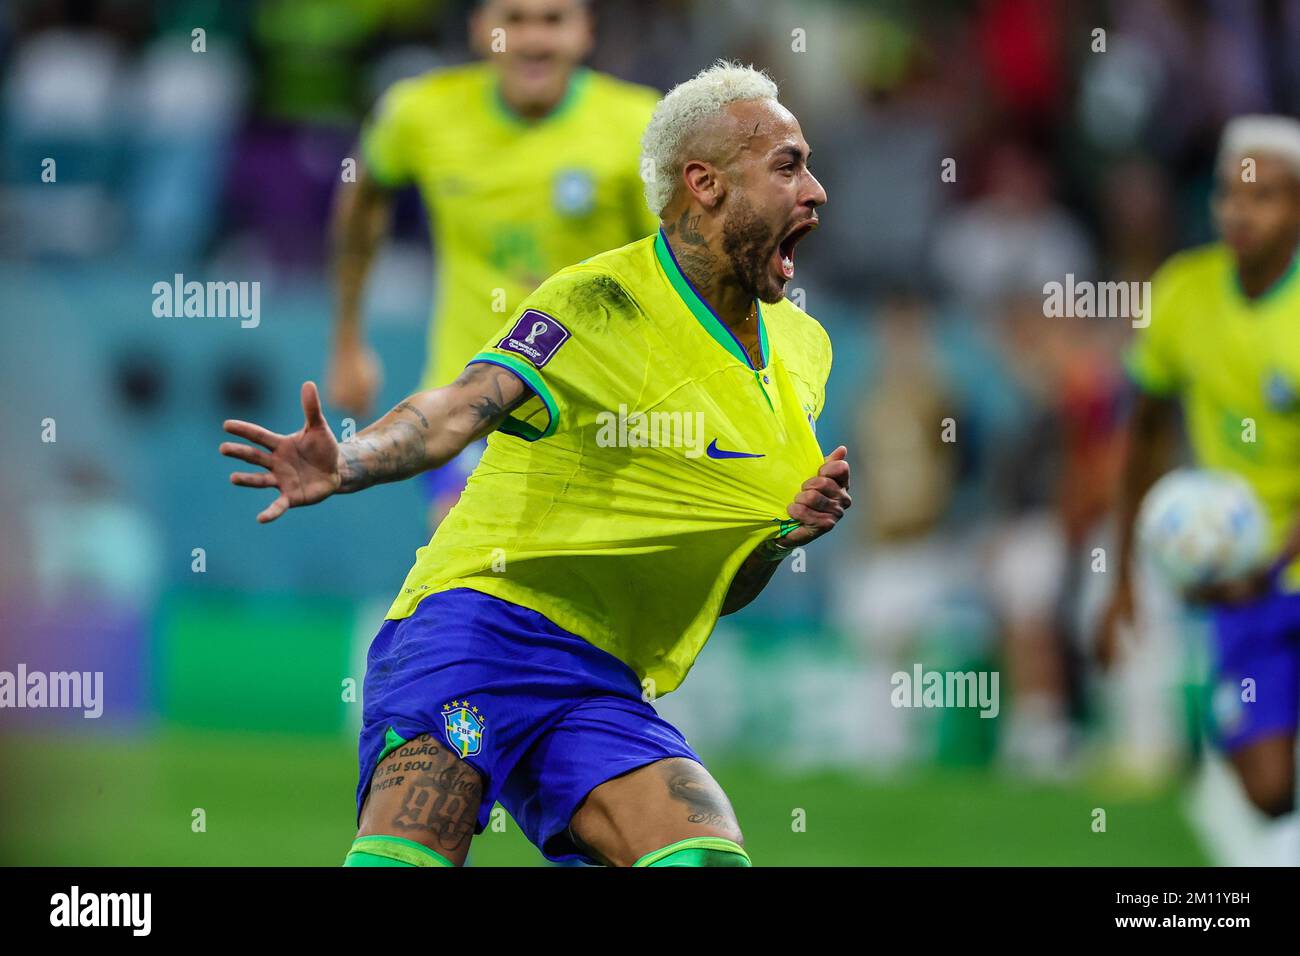 Doha, Qatar. 09th Dec, 2022. Neymar Player of Brazil celebrates a goal during a match against Croatia valid for the quarterfinals of the FIFA World Cup in Qatar at Education City Stadium in Doha, Qatar. December 9, 2022 Photo:William Volcov Credit: Brazil Photo Press/Alamy Live News Stock Photo